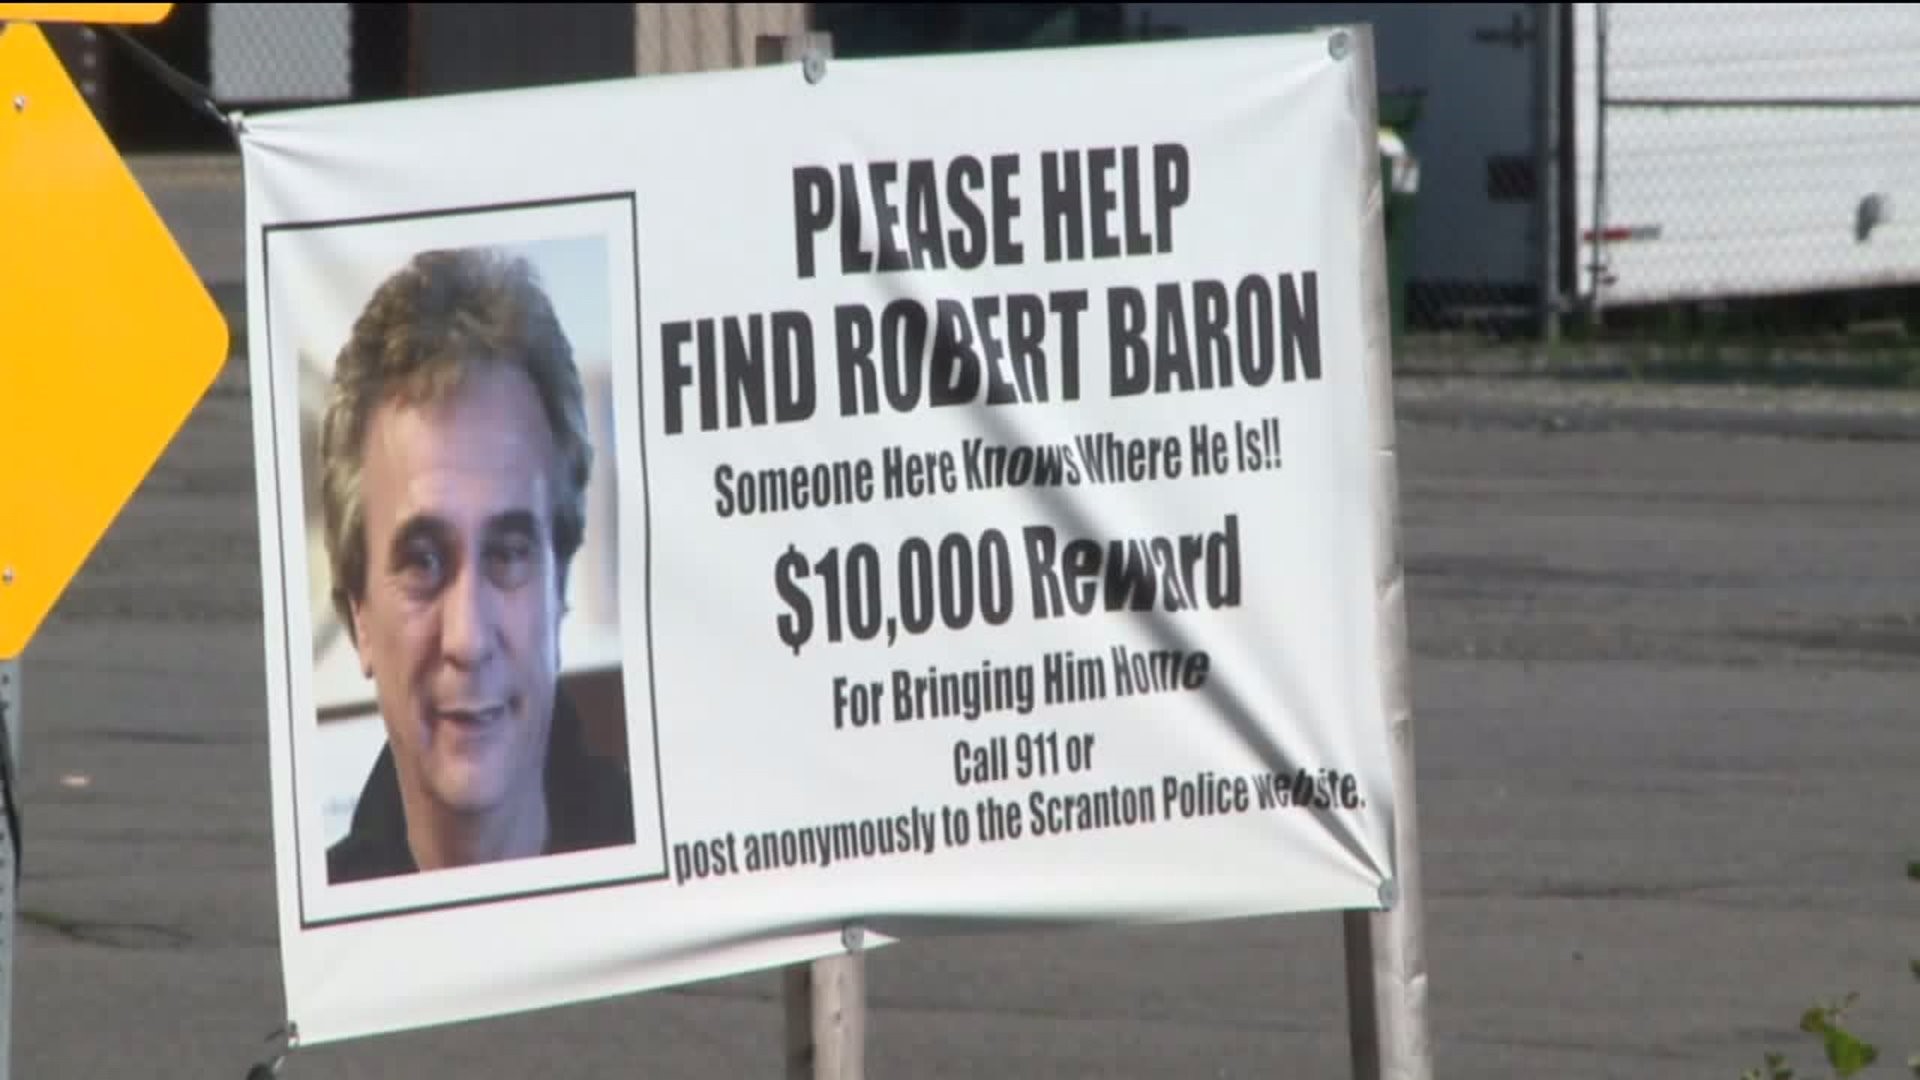 Police Continue to Search for Robert Baron